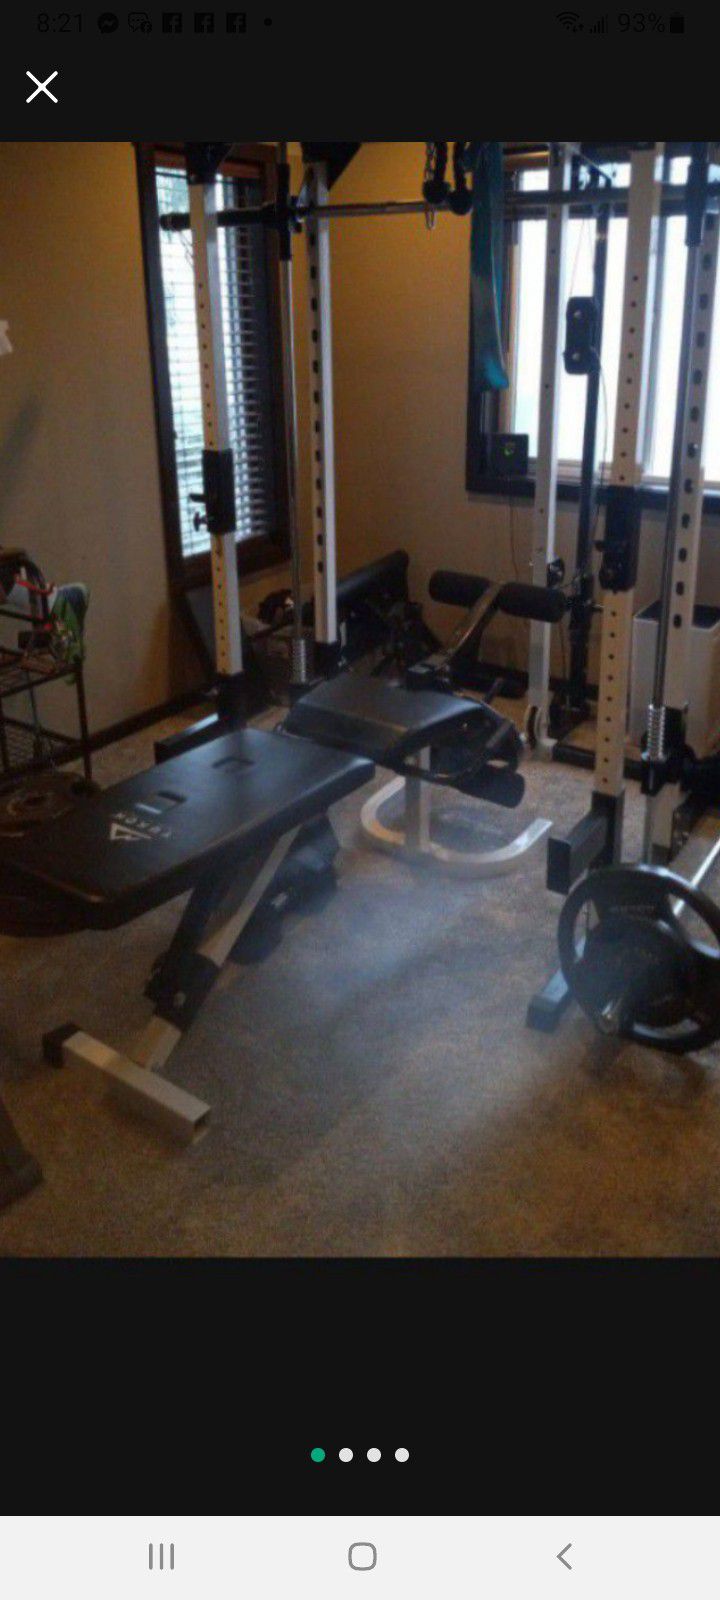 Gym Complete W Bench, Bars, Weights, Leg Press& Extension